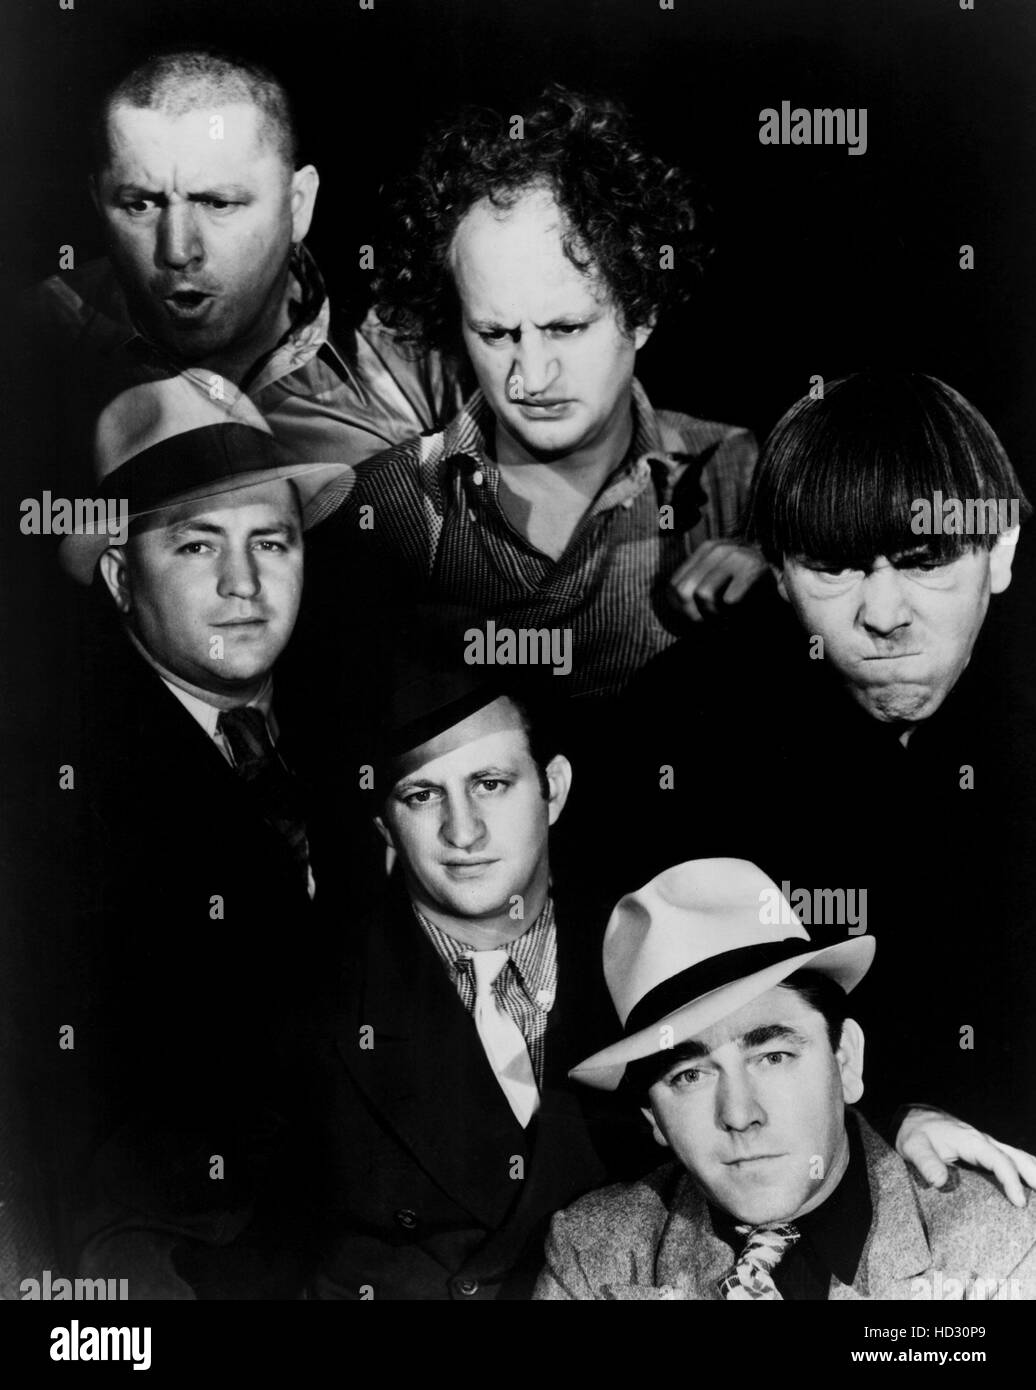 THE THREE STOOGES and their alter egos: CURLY HOWARD, LARRY FINE, MOE HOWARD; Columbia publicity shot, 1930s Stock Photo